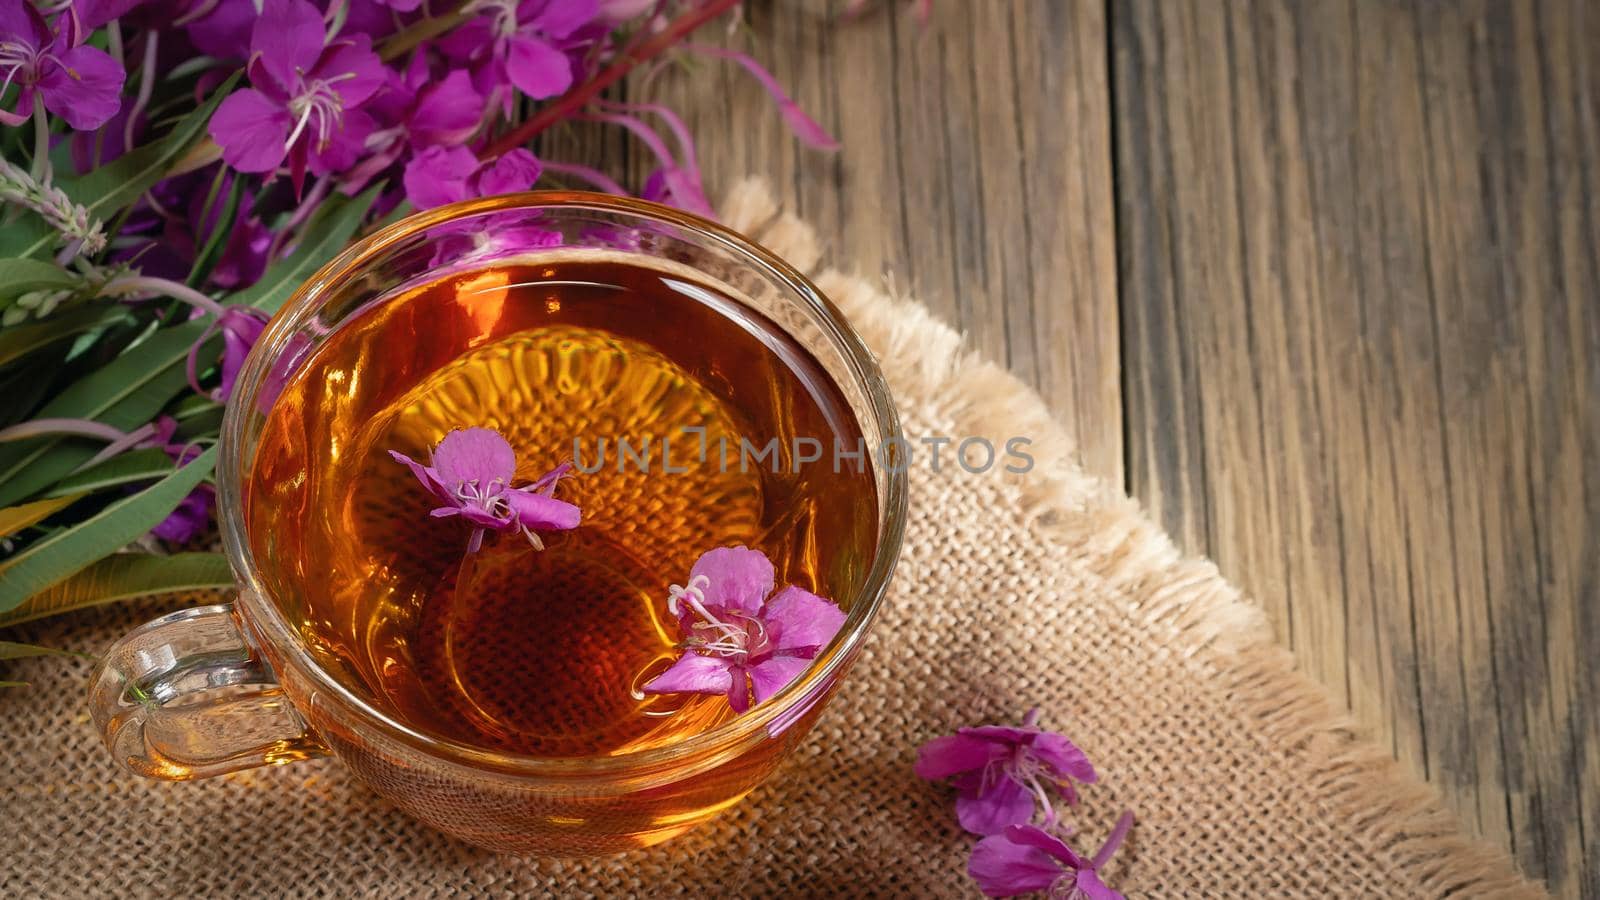 Herbal tea made from fireweed known as blooming sally in cup, copy space.